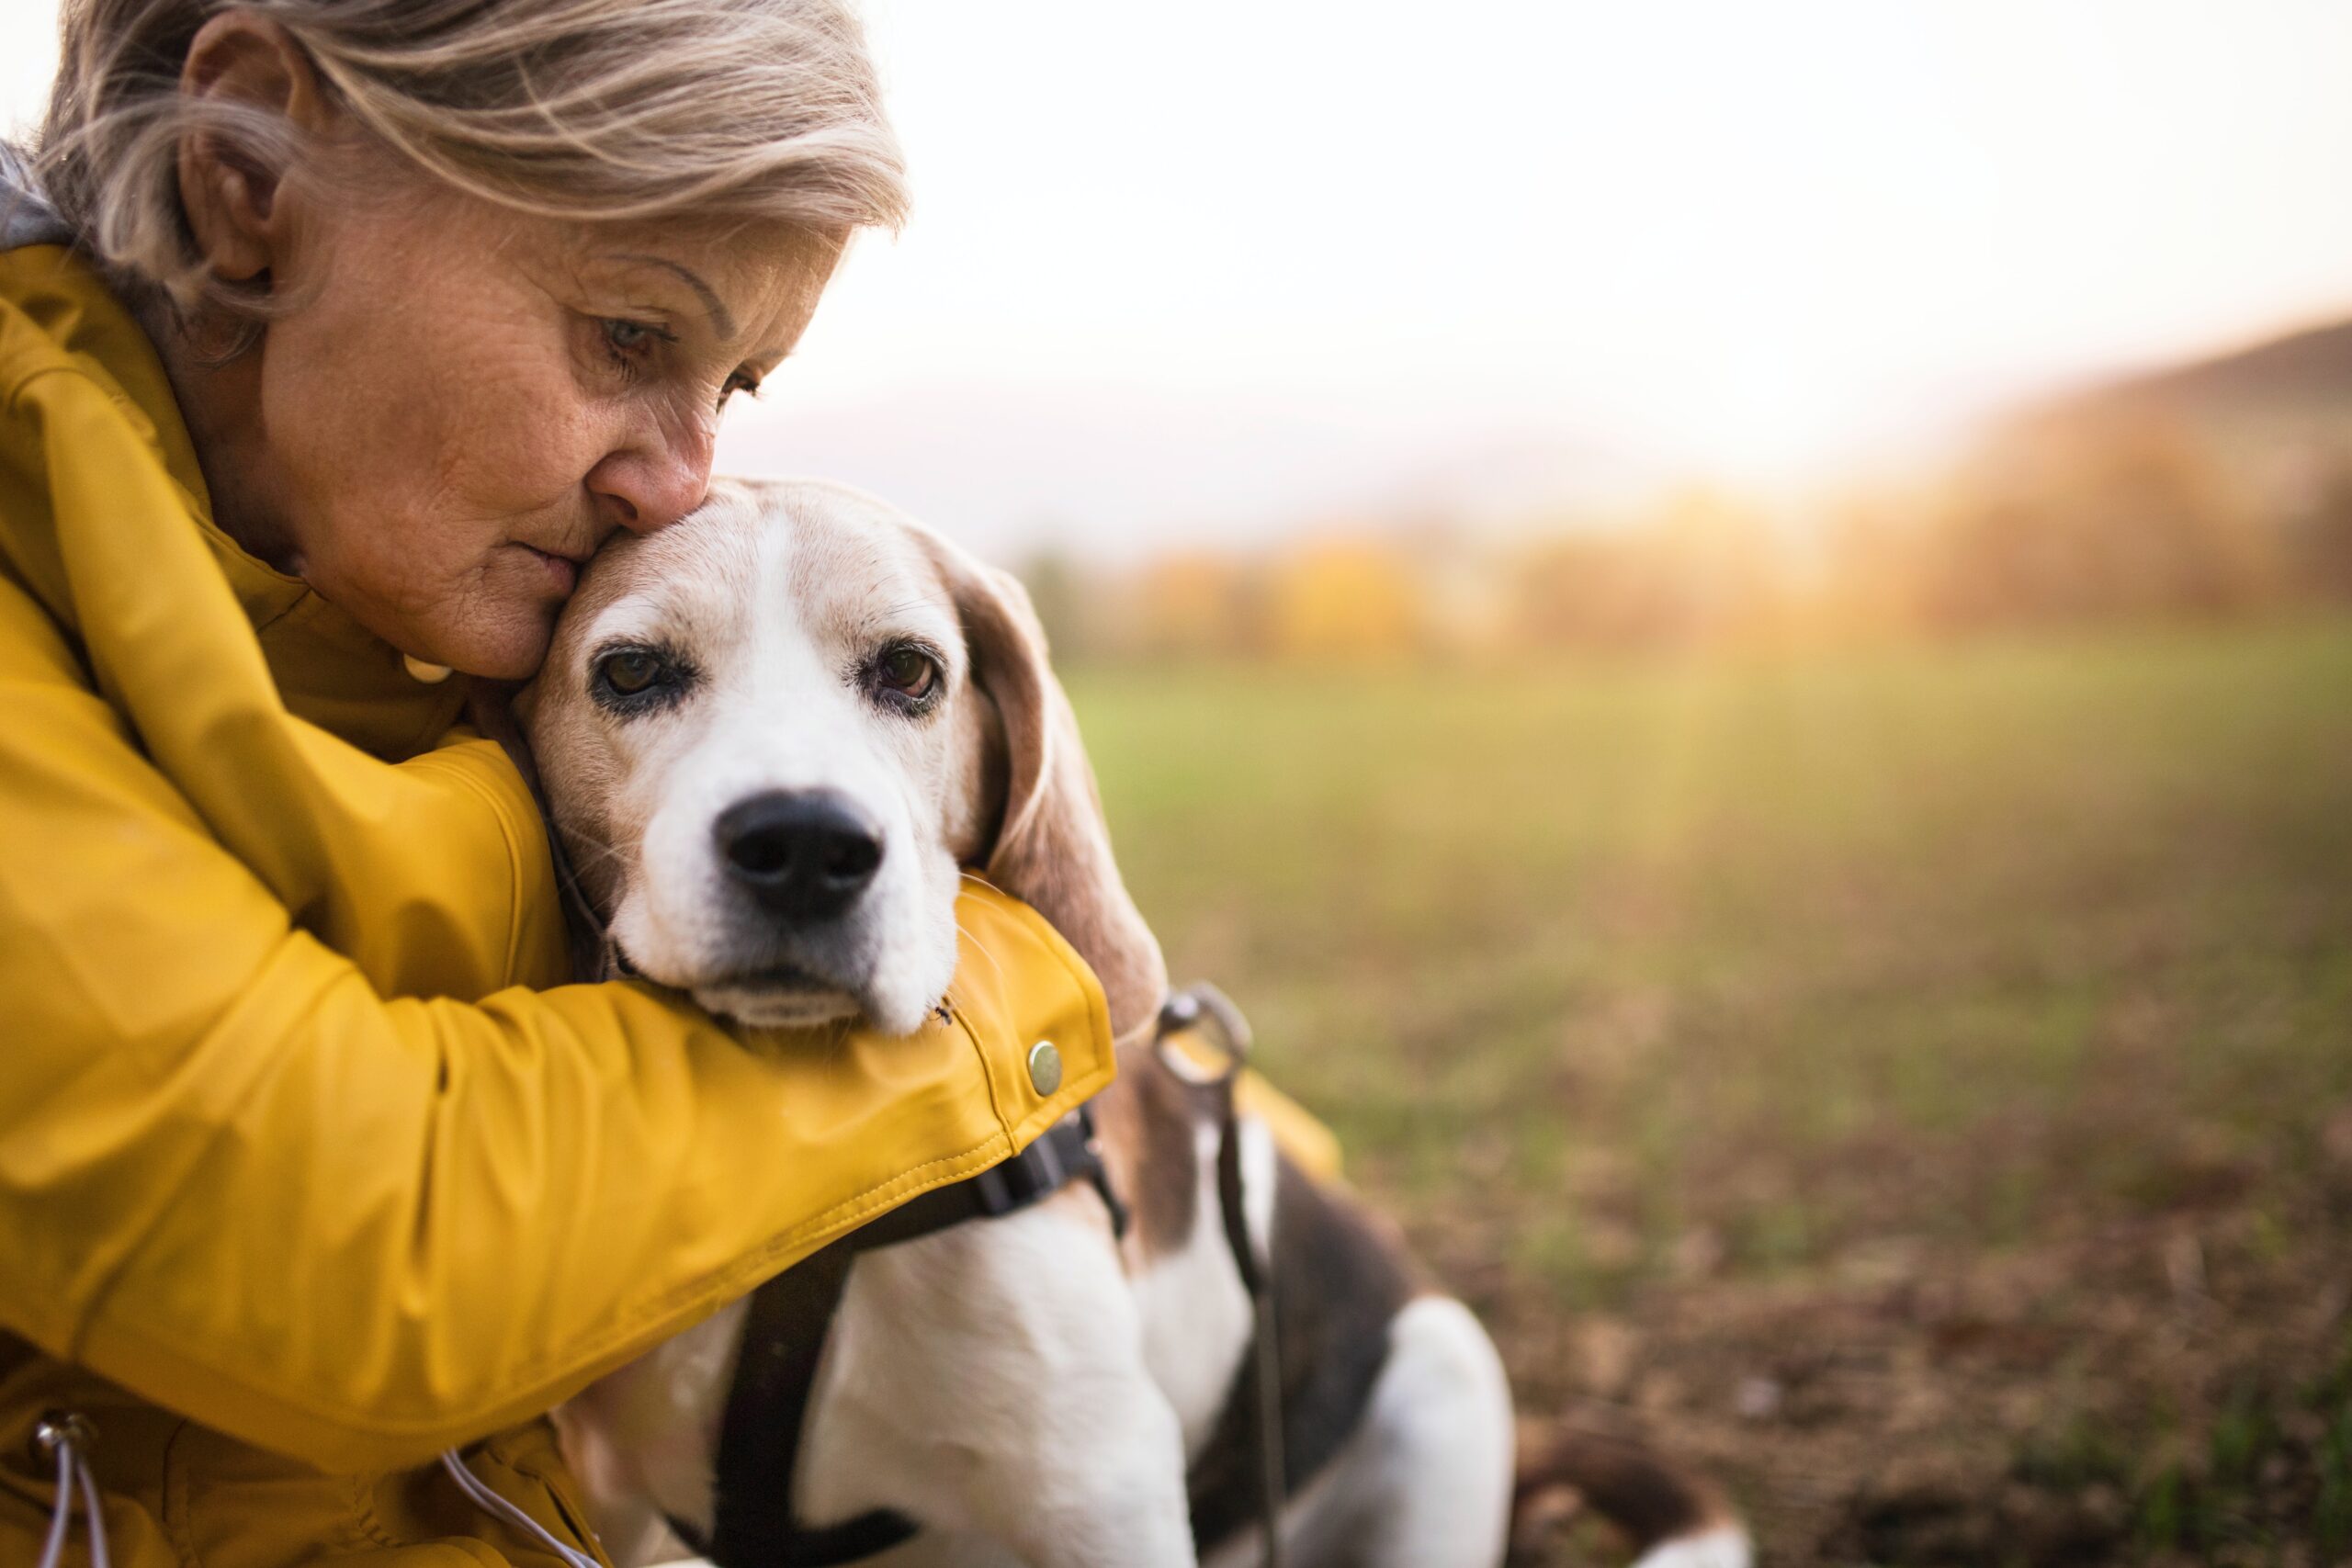 Old beagle being embraced by their owner in a yellow coat at sunset